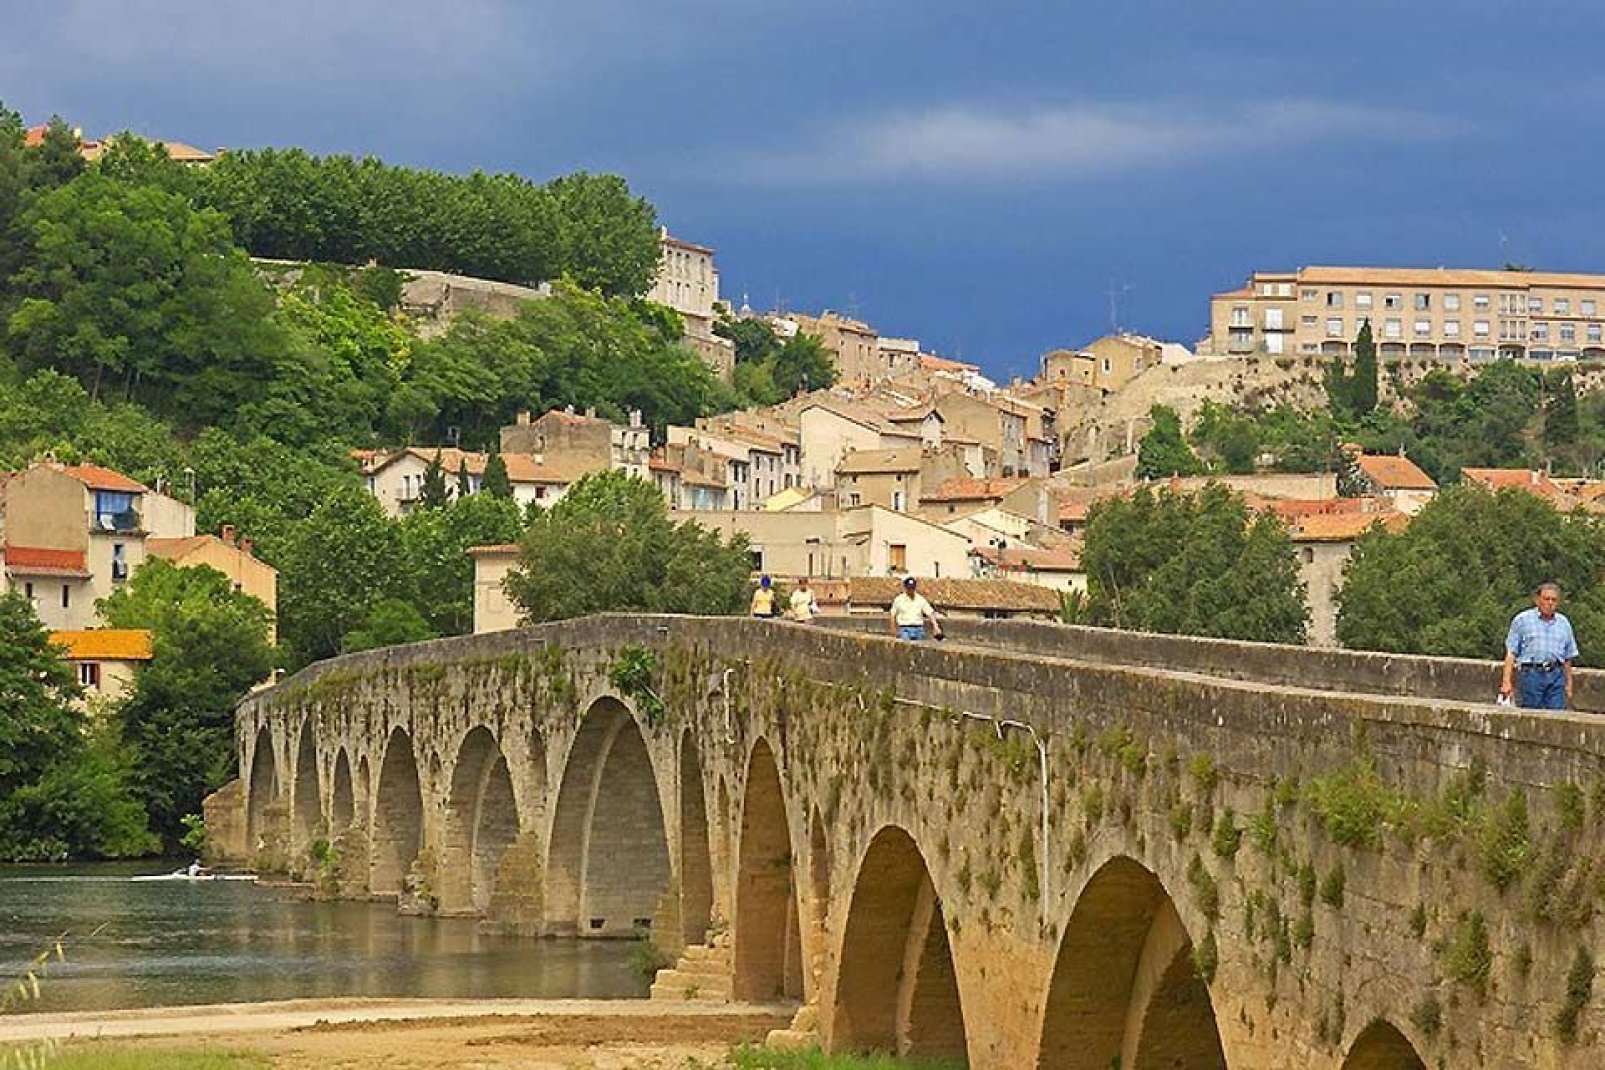 This 12th century bridge has long been the only way of getting from Provence to Toulouse.